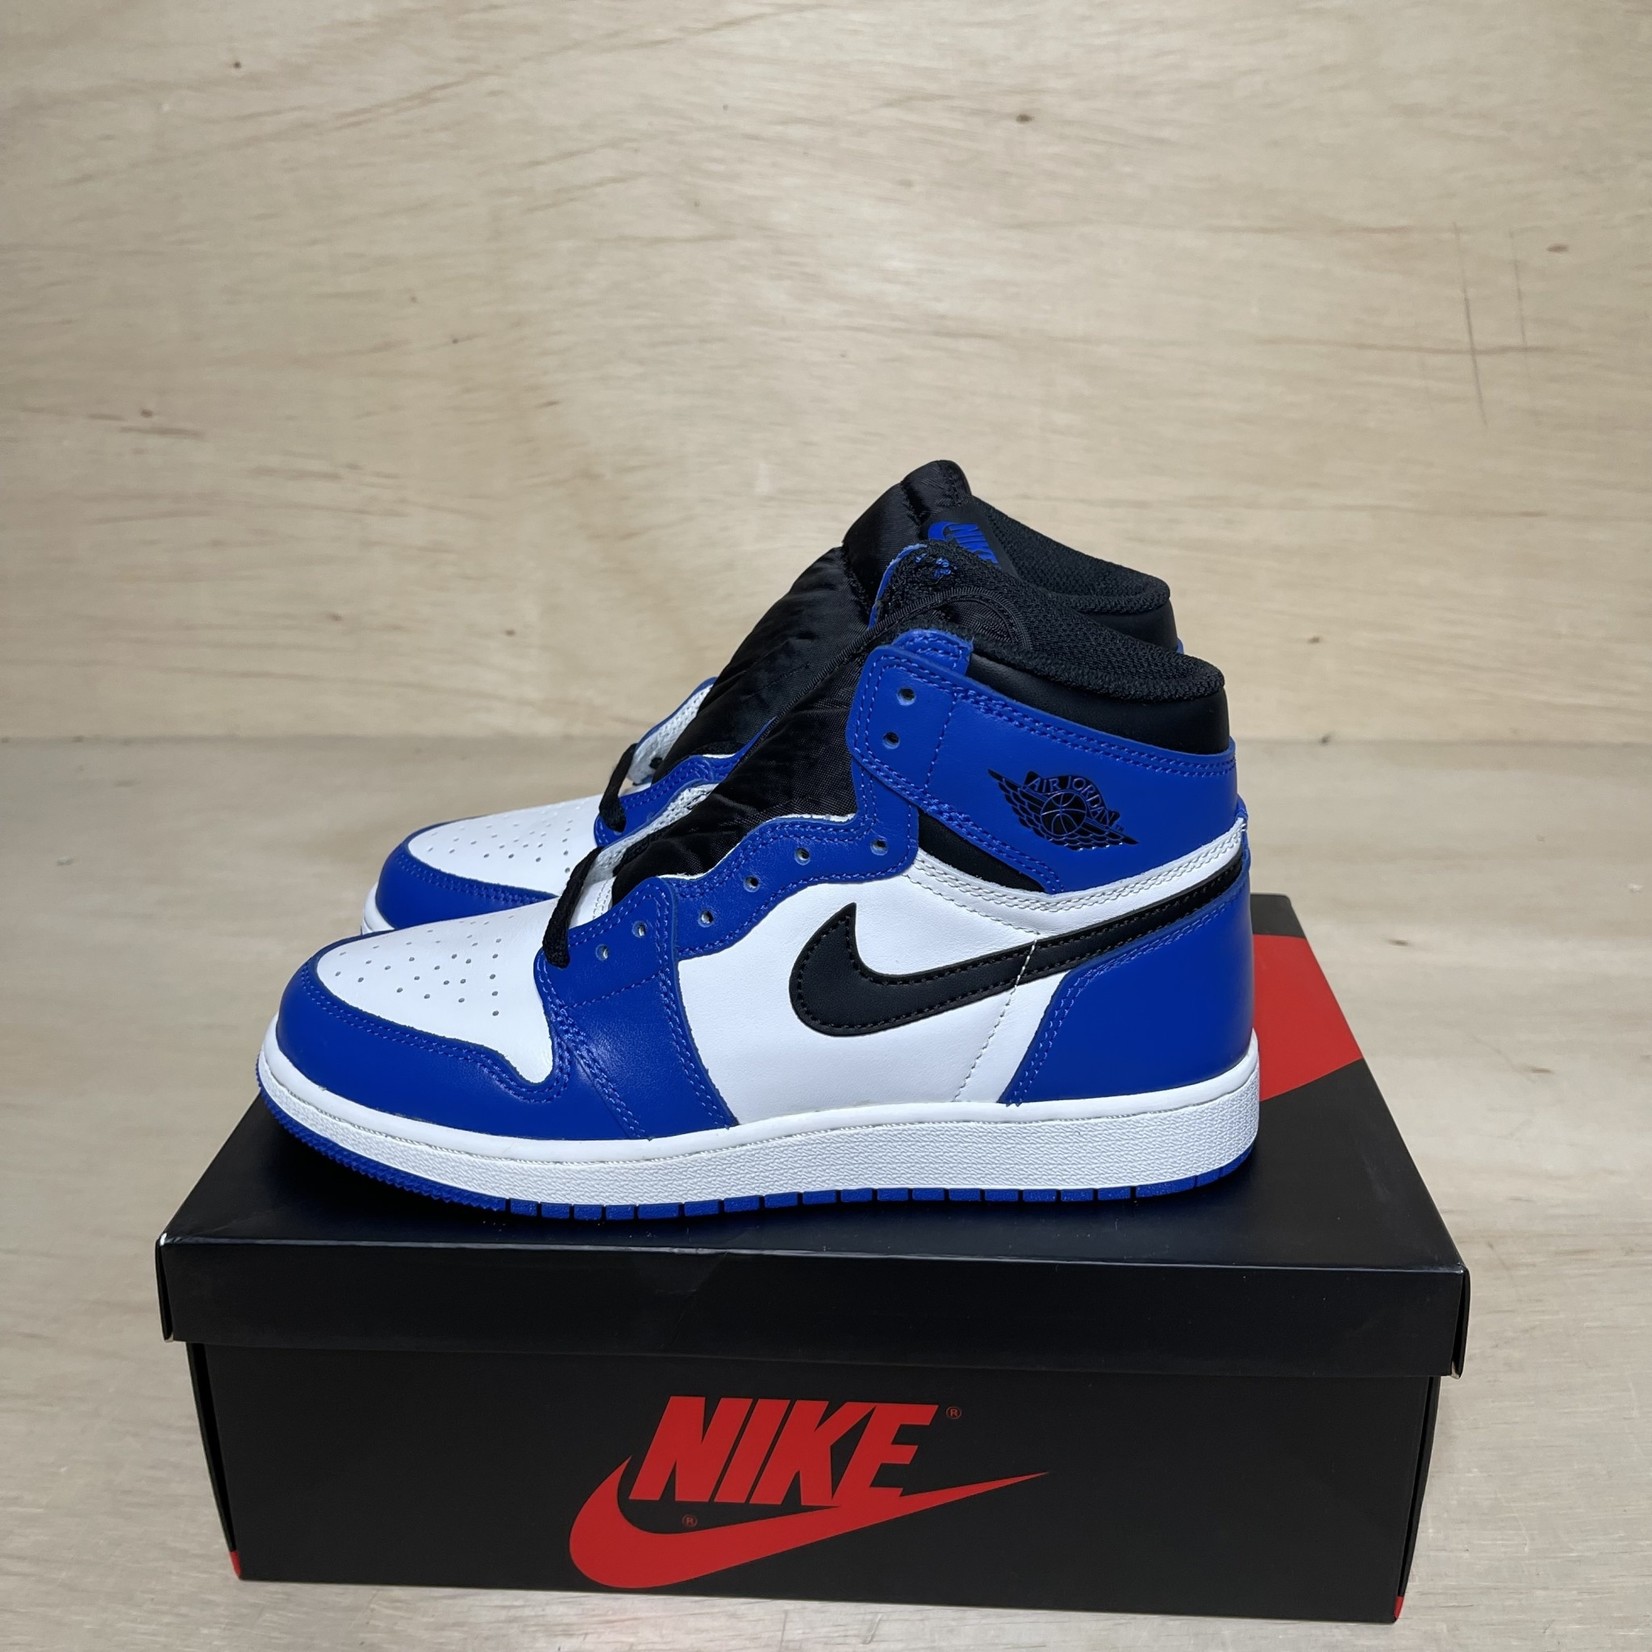 Jordan 1 Retro High Game Royal (GS) Size 6Y, DS BRAND NEW